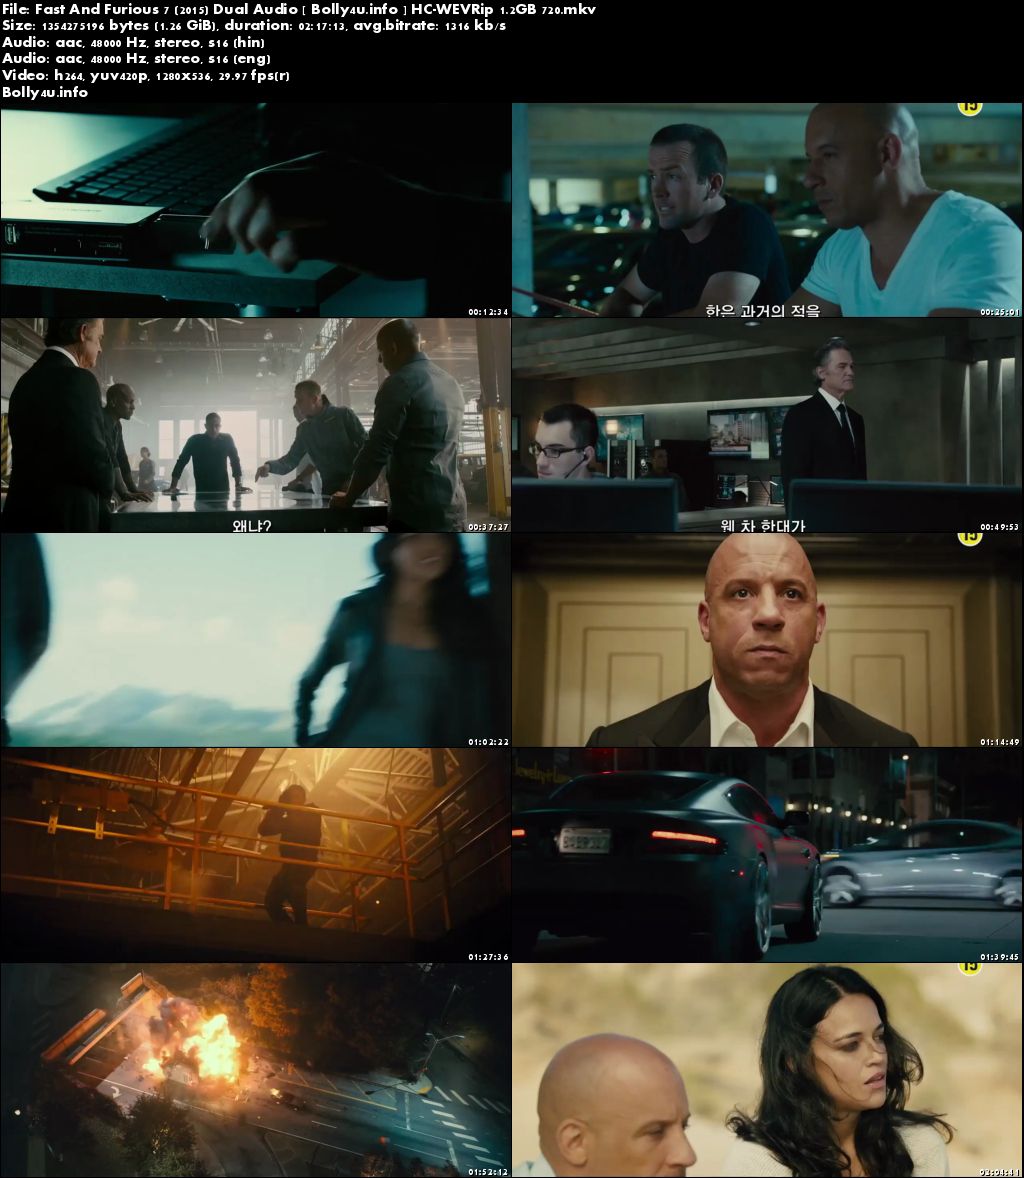 Fast and furious 7 hindi dubbed download 720p filmyzilla